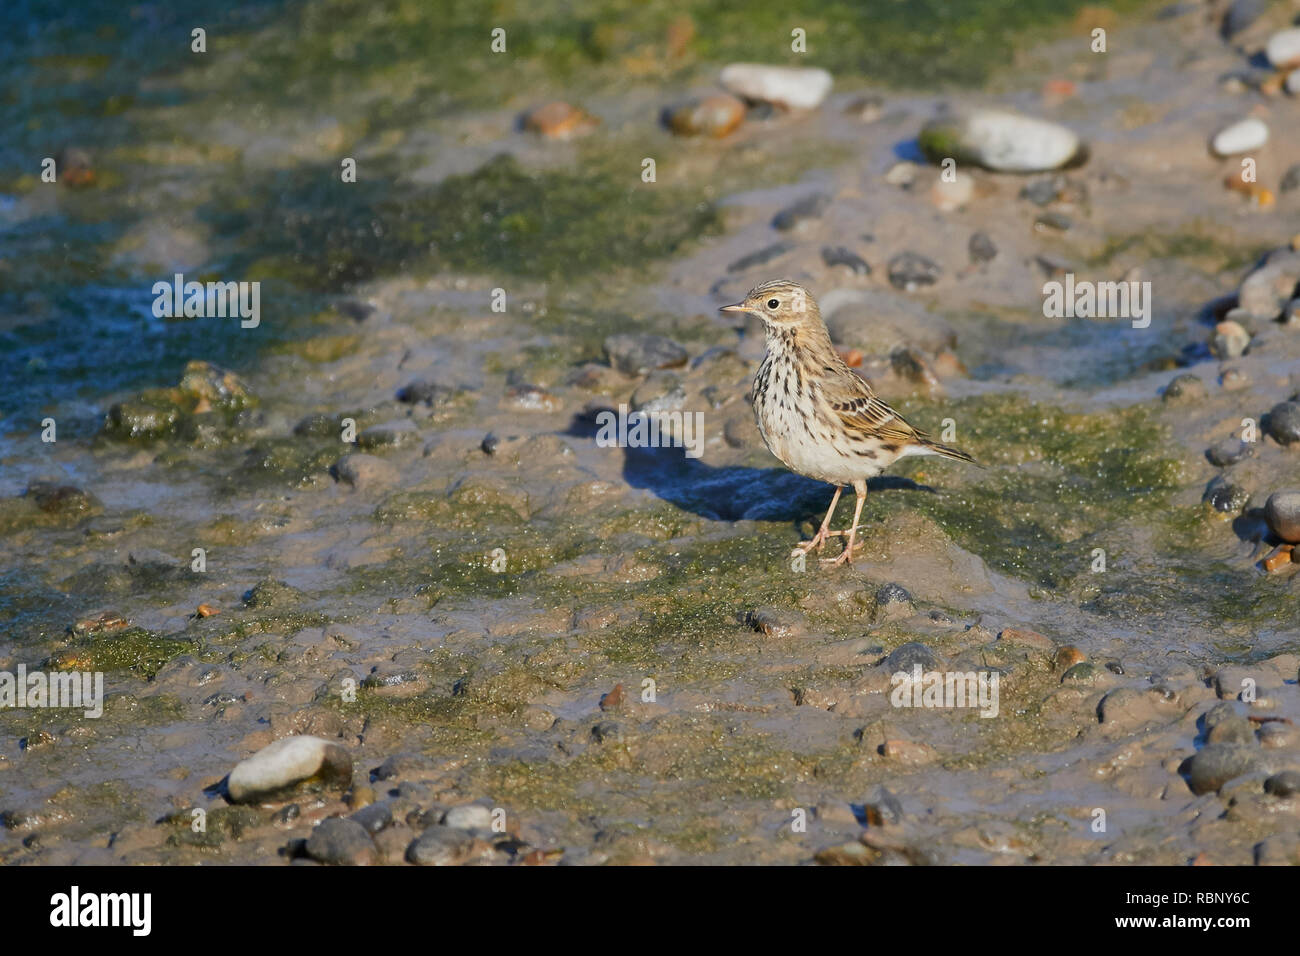 A Rock Pipit (Anthus Petrosus) standing on a beach with rocks looking for its next meal, England, UK Stock Photo